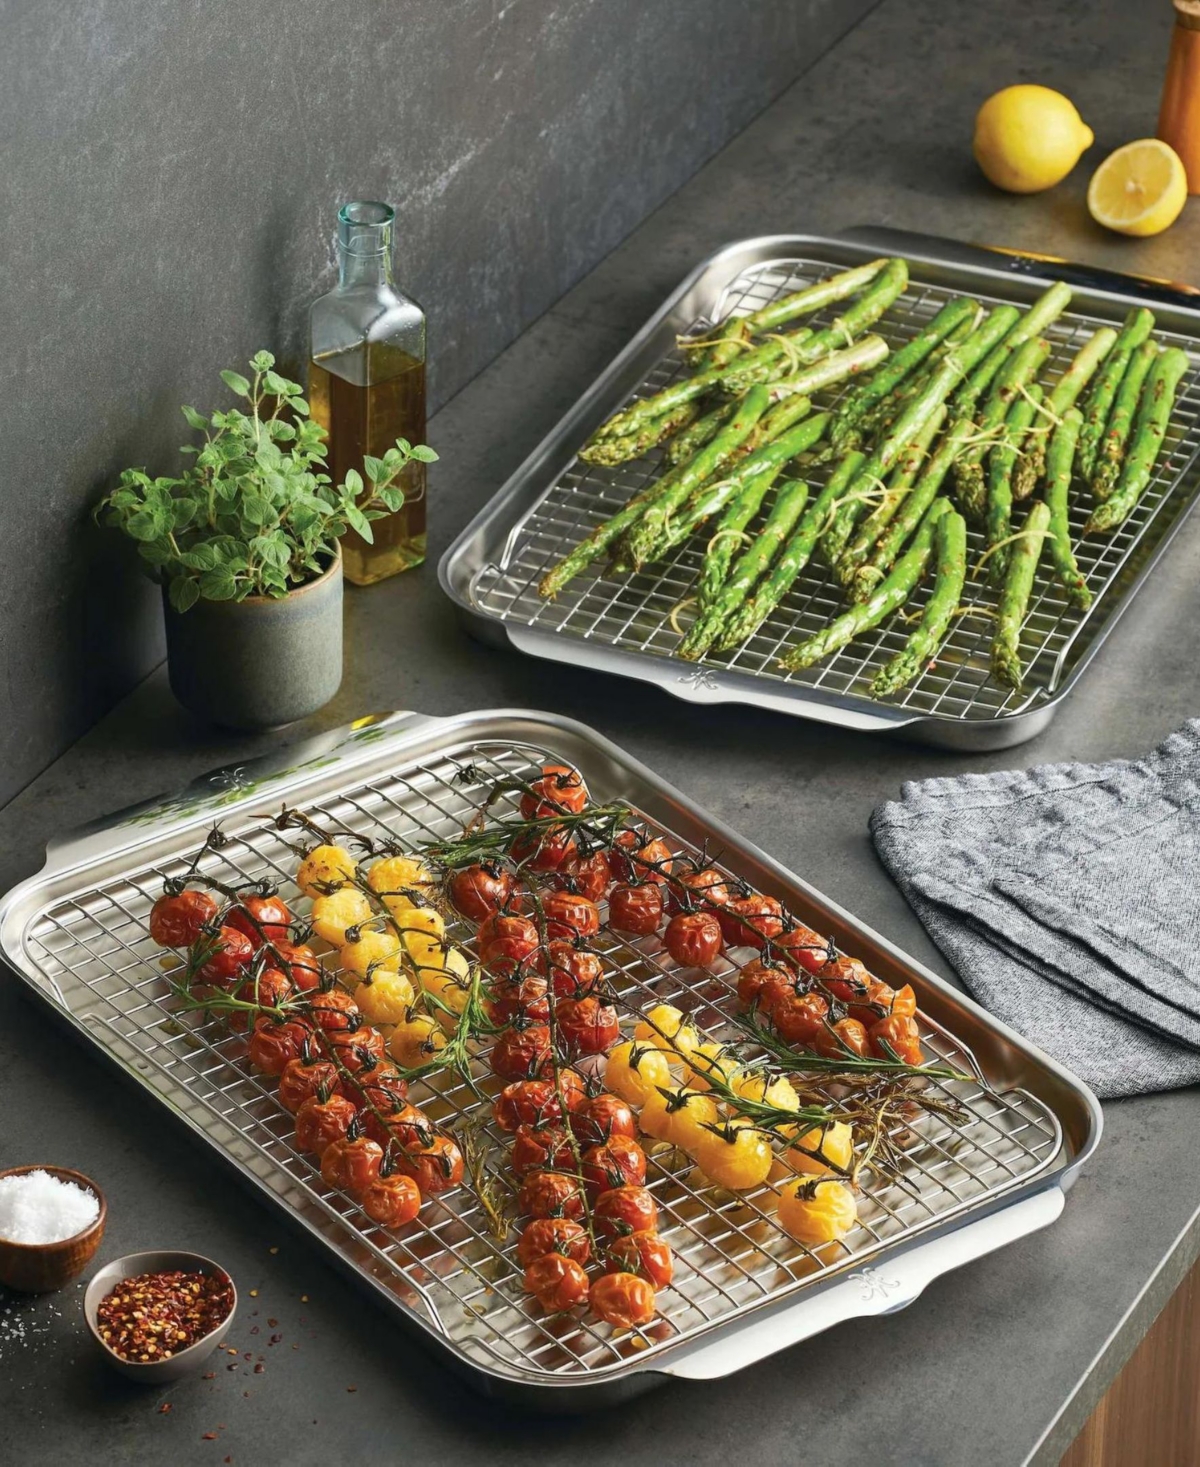 Shop Hestan Provisions Oven Bond Try-ply, 4-piece Set, 2 Half Sheet Pans With 2 Racks In Stainless Steel